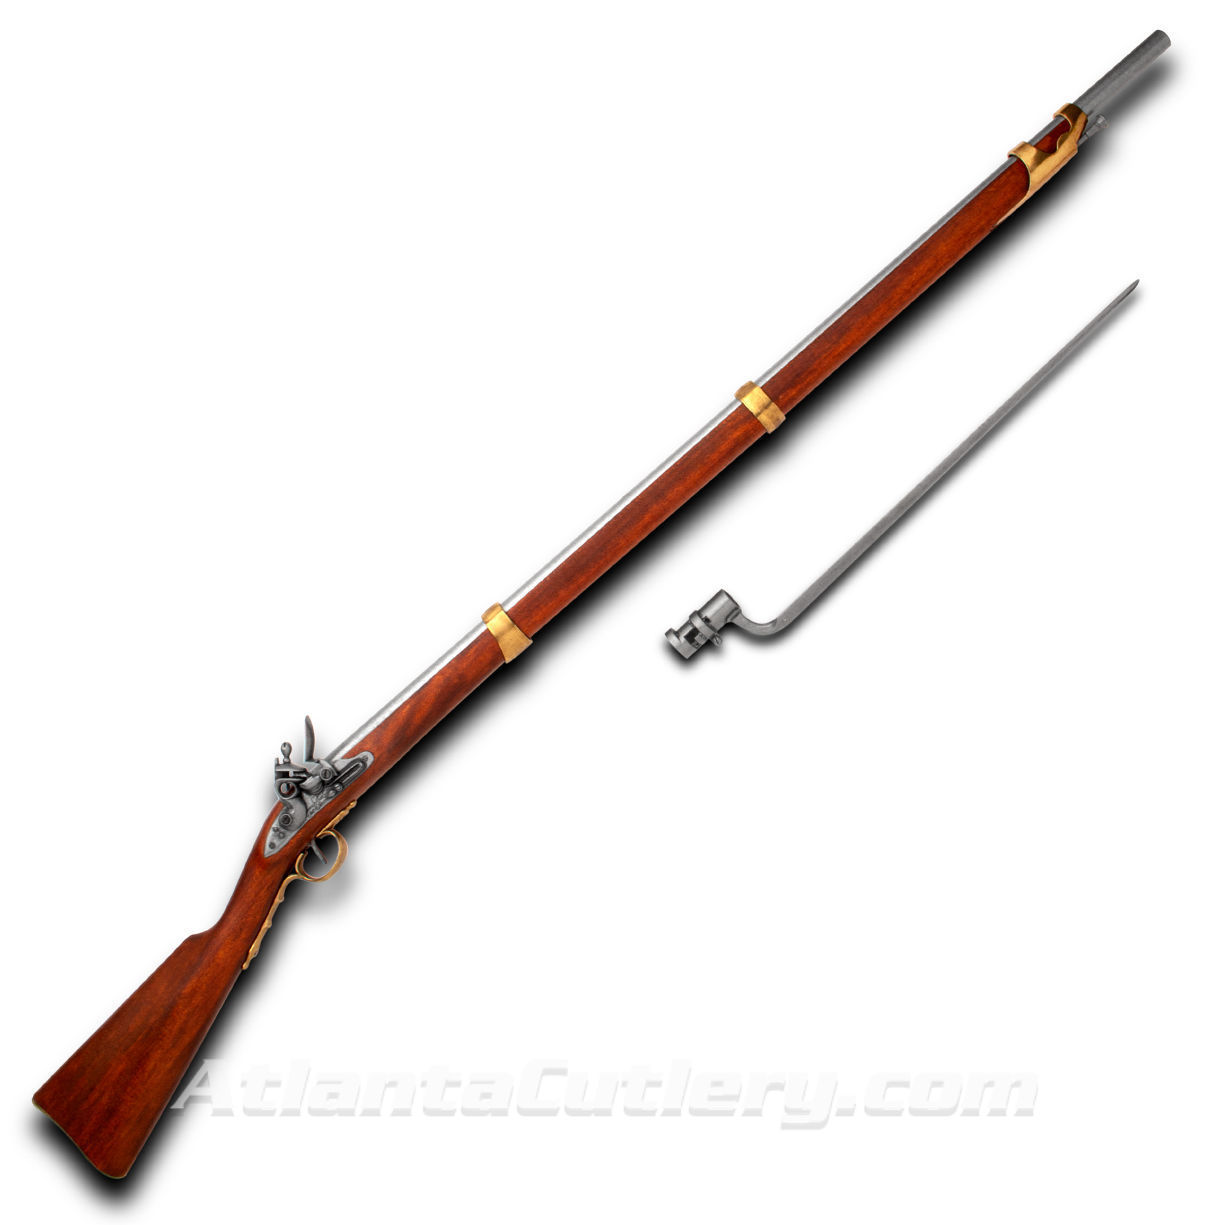 Colonial Era Charleville Musket Non-firing Replica includes a bayonet with a full-length wood stock with brass butt